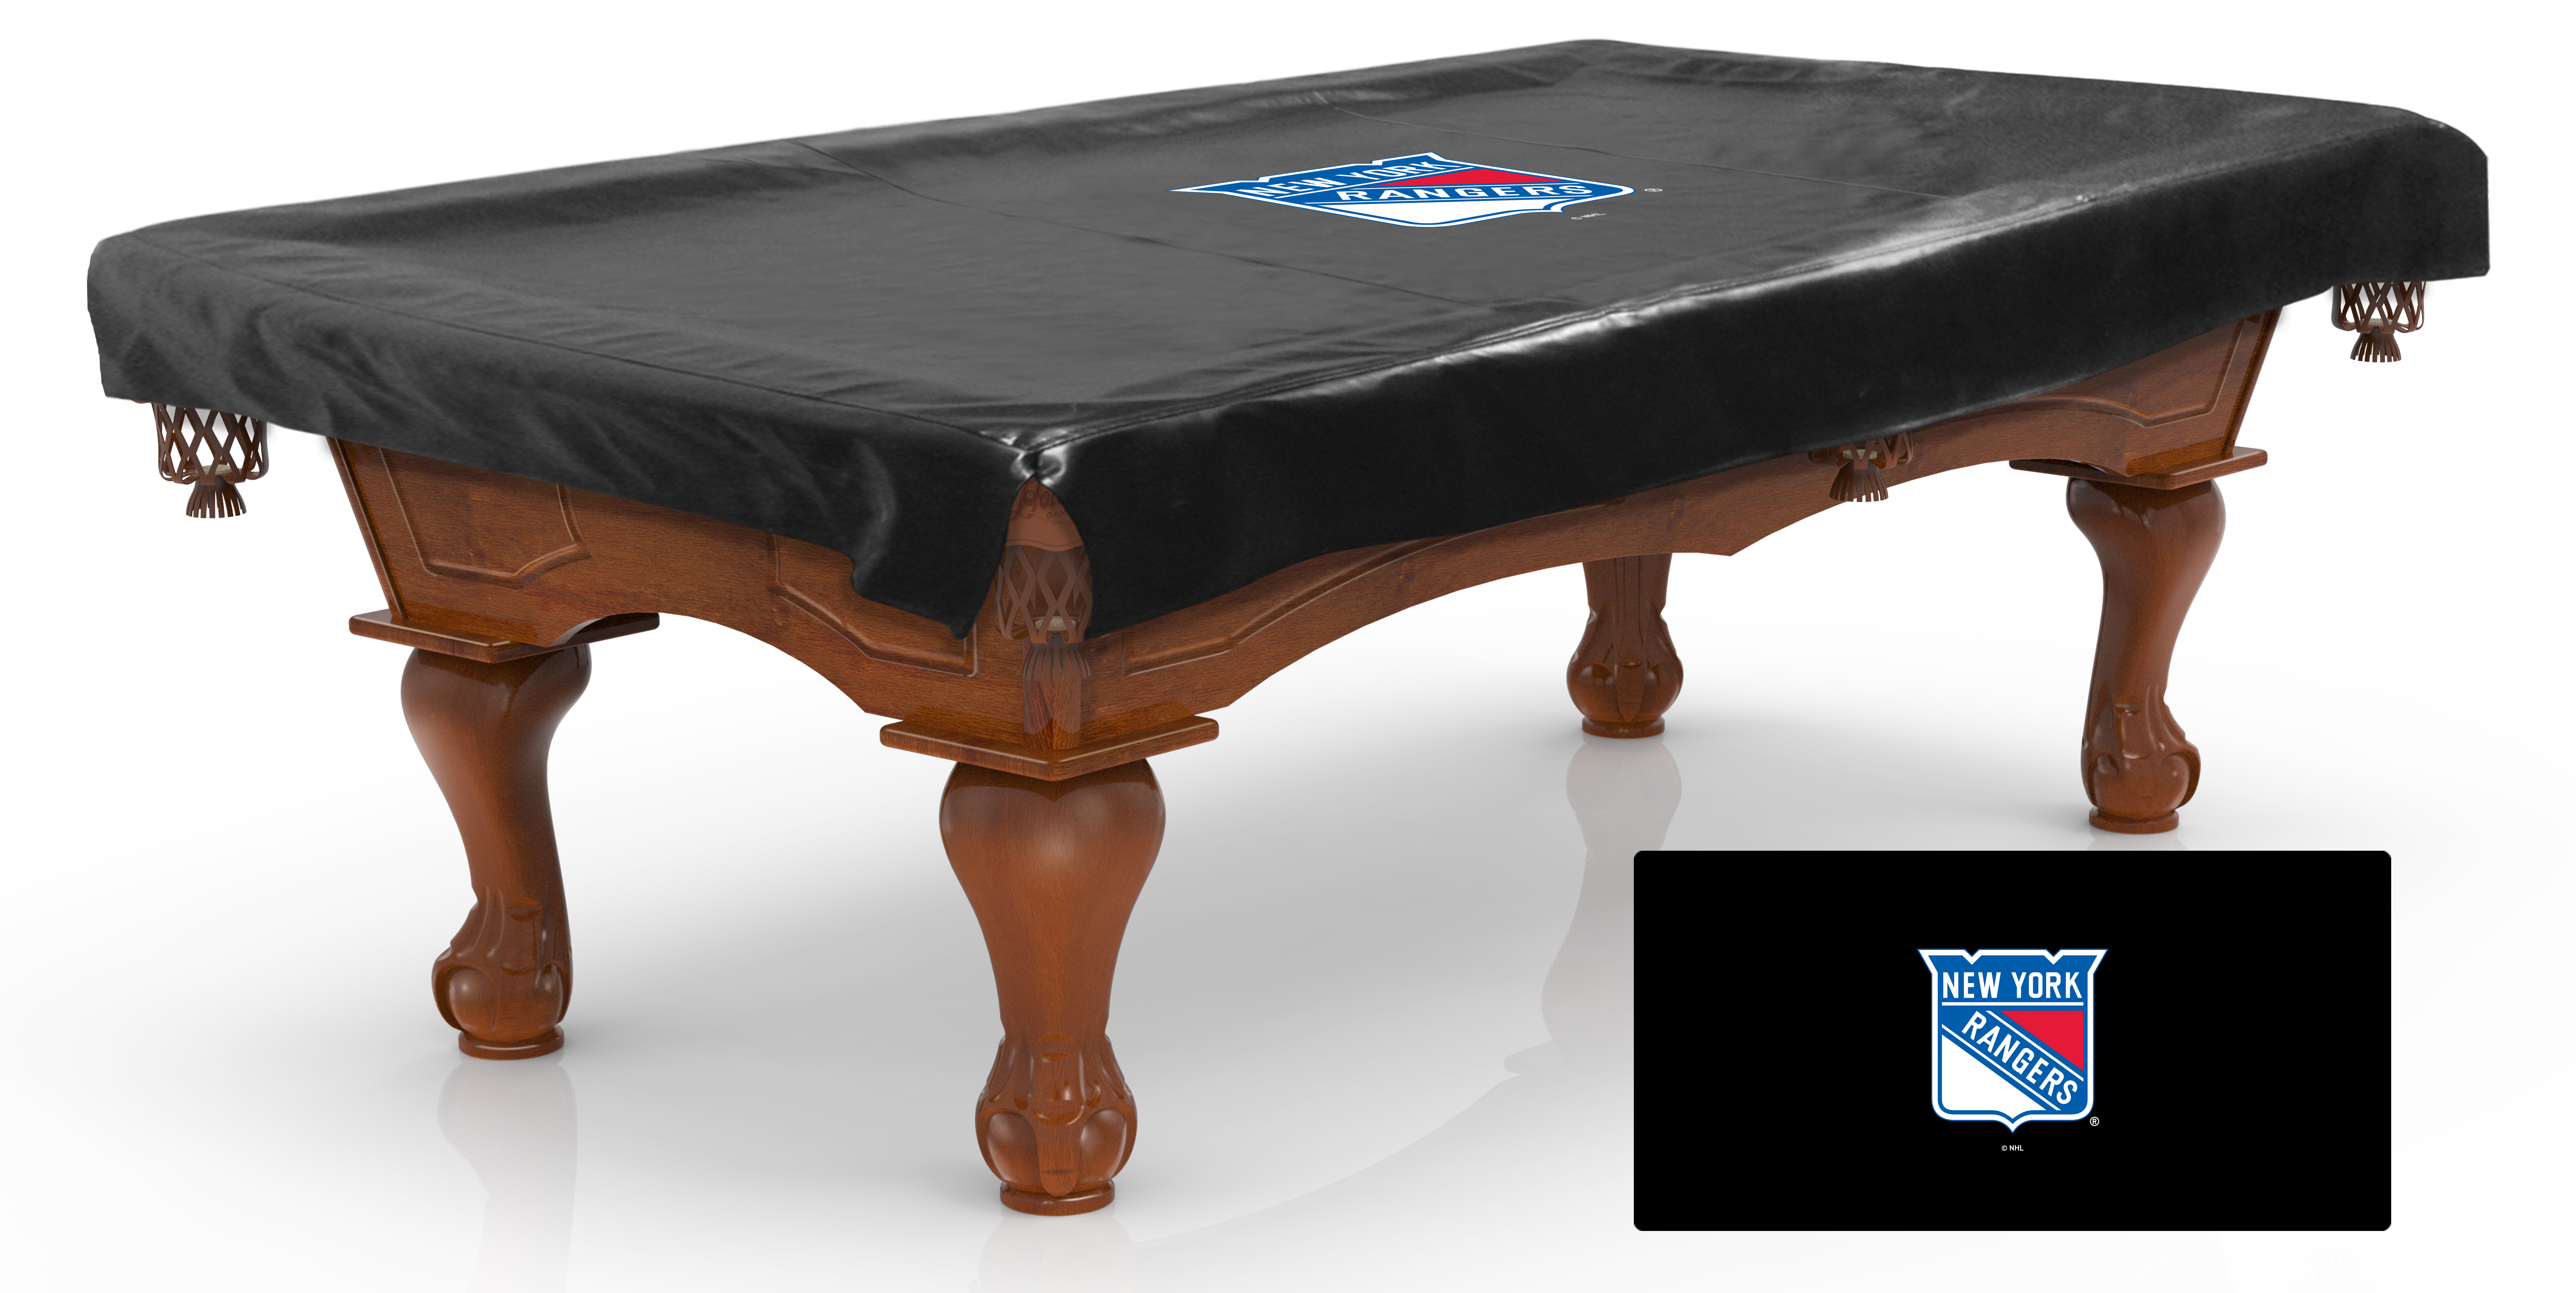 Picture of Holland Bar Stool BCV7NYRang New York Rangers Billiard Table Cover